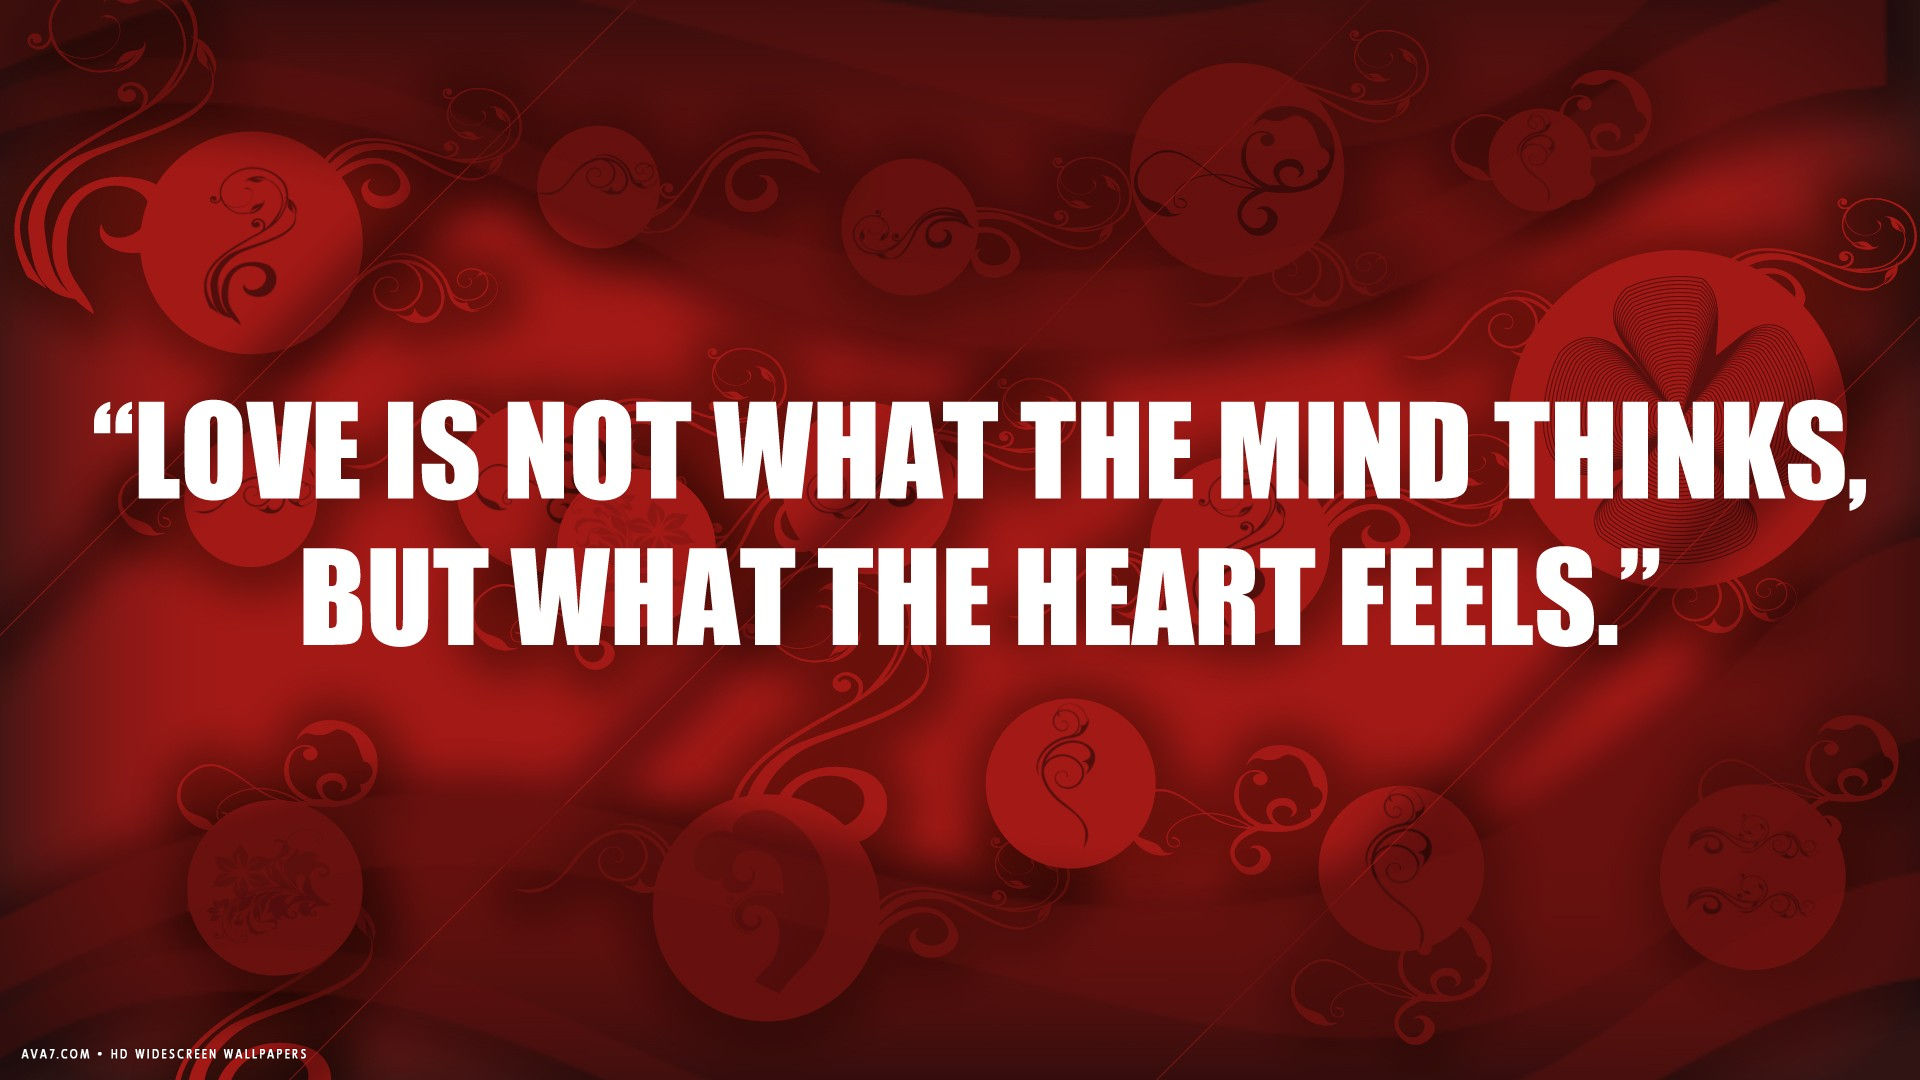 Love Quote What Heart Feels Red Hd Widescreen Wallpaper Romantic